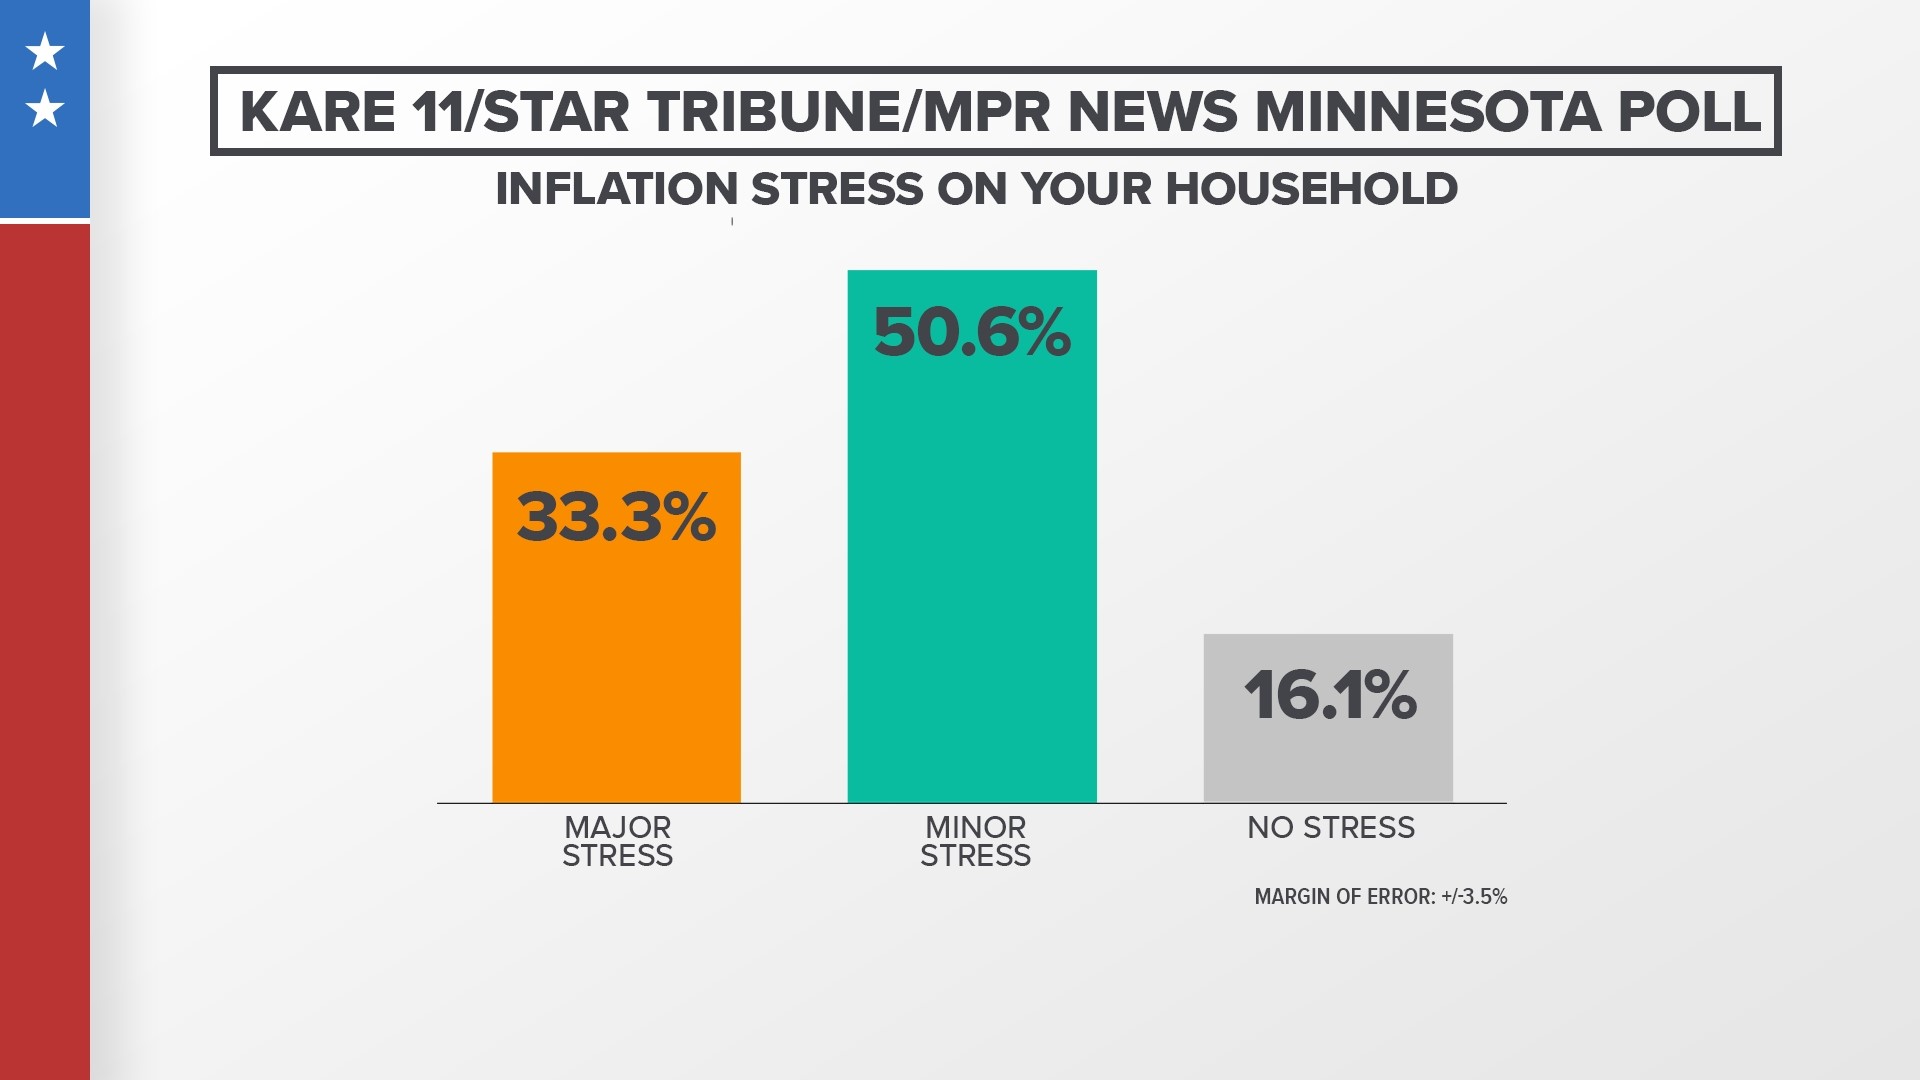 Half of the Minnesotans polled said their households are experiencing at least “minor” stress from inflation.